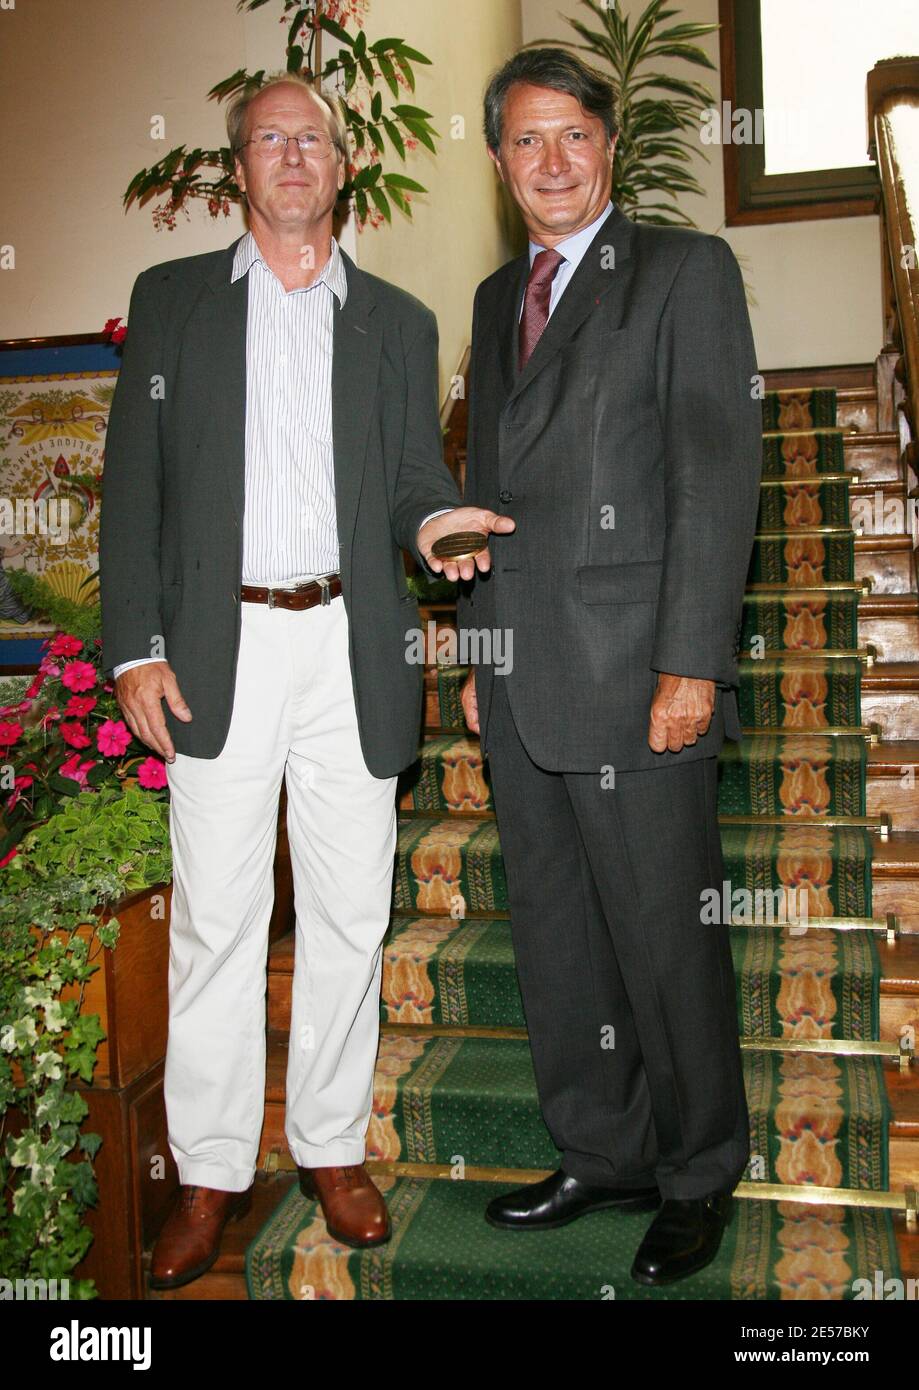 US actor William Hurt (L,) receives the medal of Deauville city 'Medaille de La Ville de Deauville' from by its mayor Philippe Augier, at Deauville's city hall, France, on September 11, 2008. Photo by Dennis Guignebourg/ABACAPRESS.COM Stock Photo